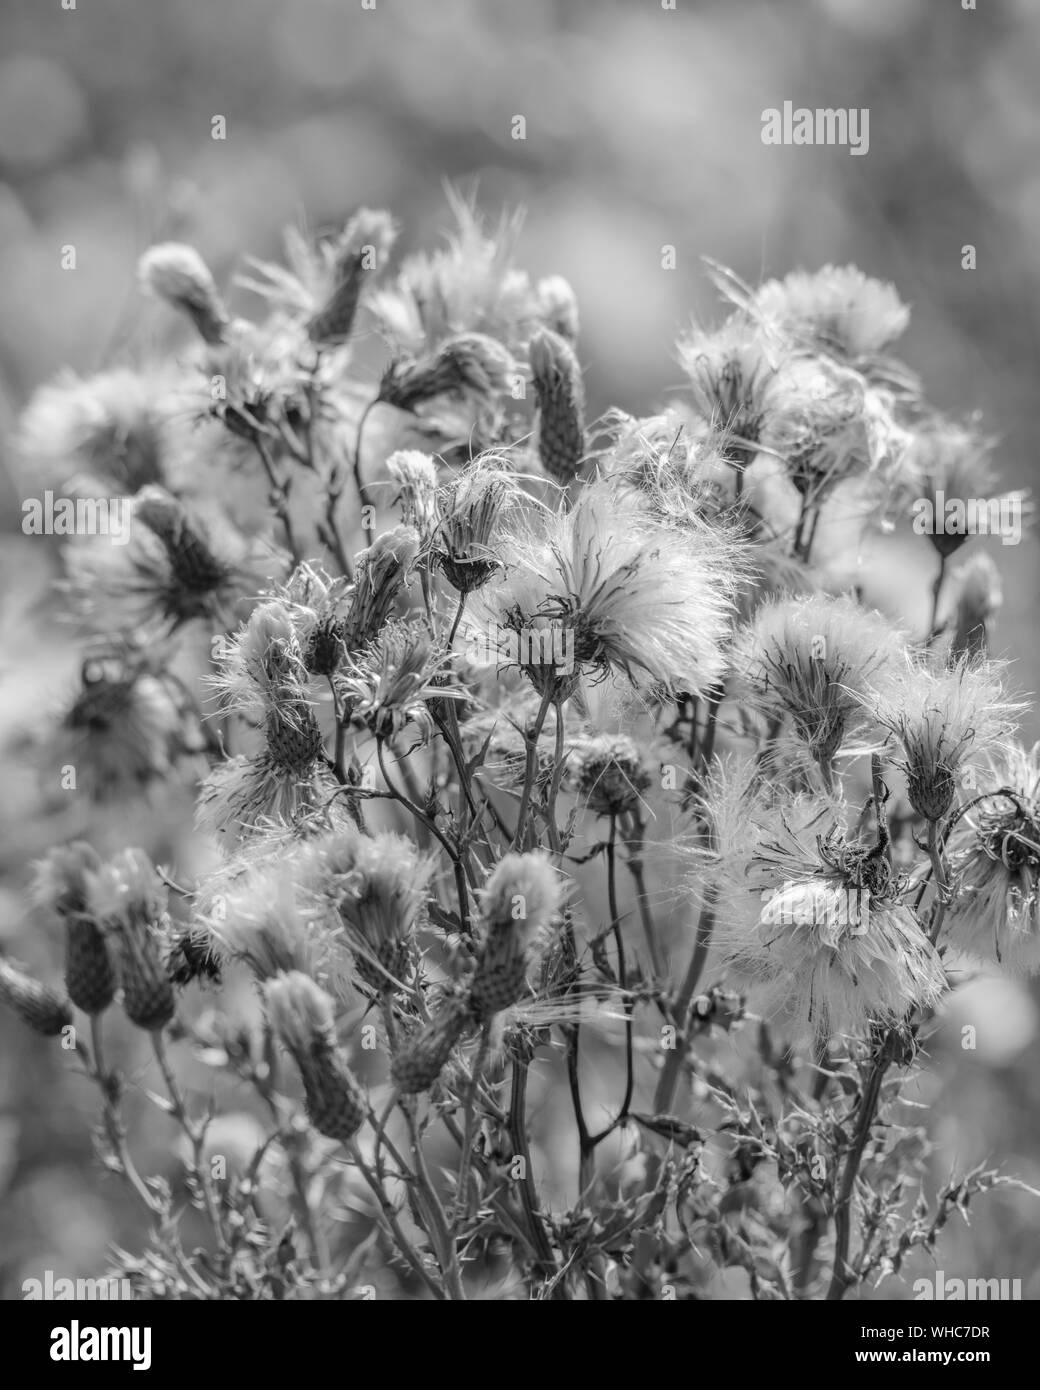 B&W close-up shot of feathery thistledown of Field Thistle / Creeping Thistle - Cirsium arvense. Species is a noxious troublesome agricultural weed. Stock Photo